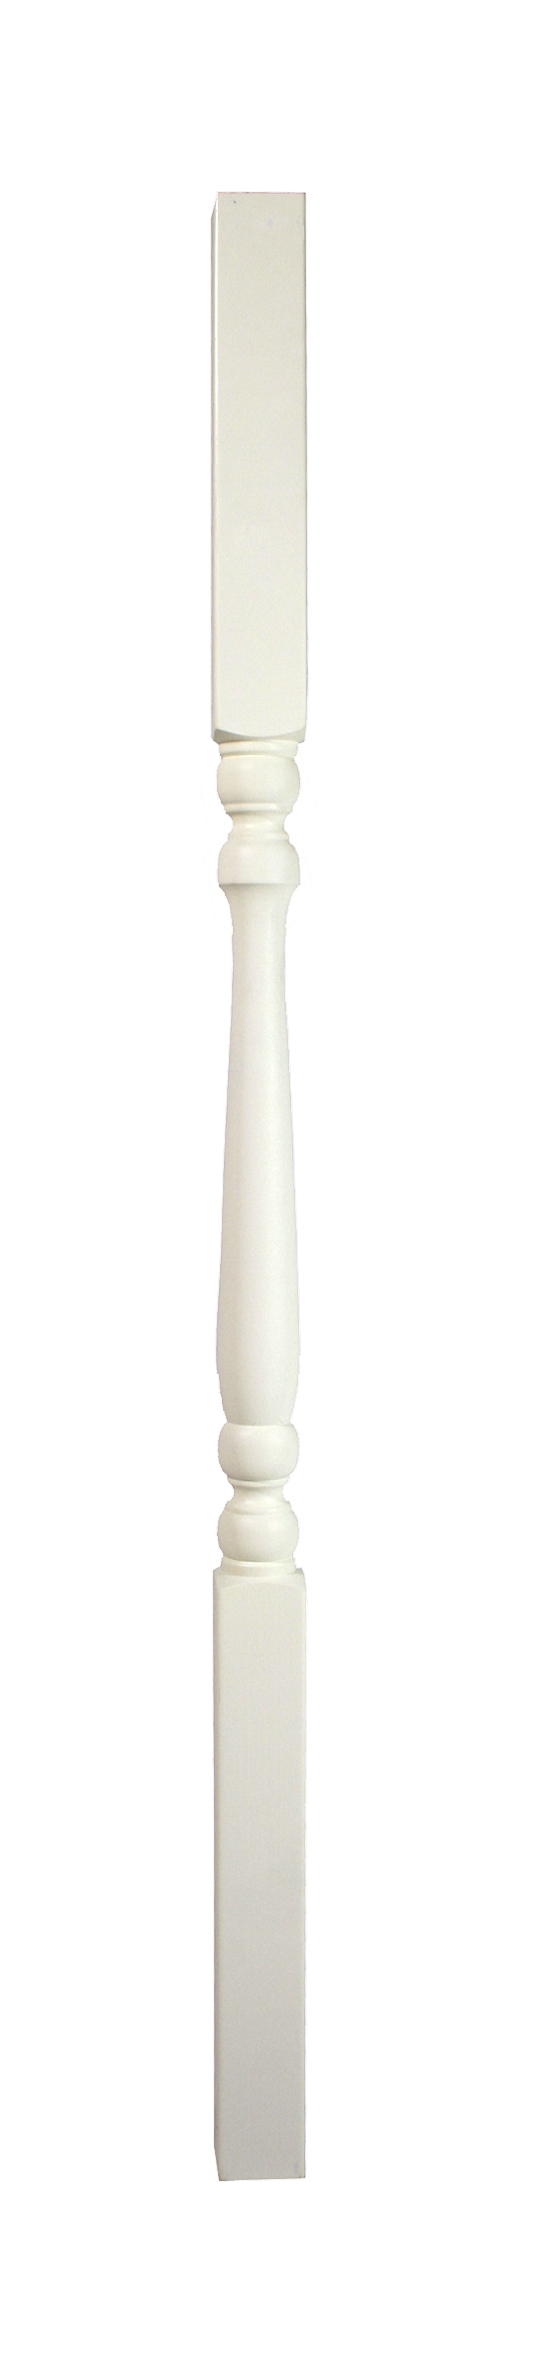 1 Smooth Primed Colonial Spindle 900 41 U